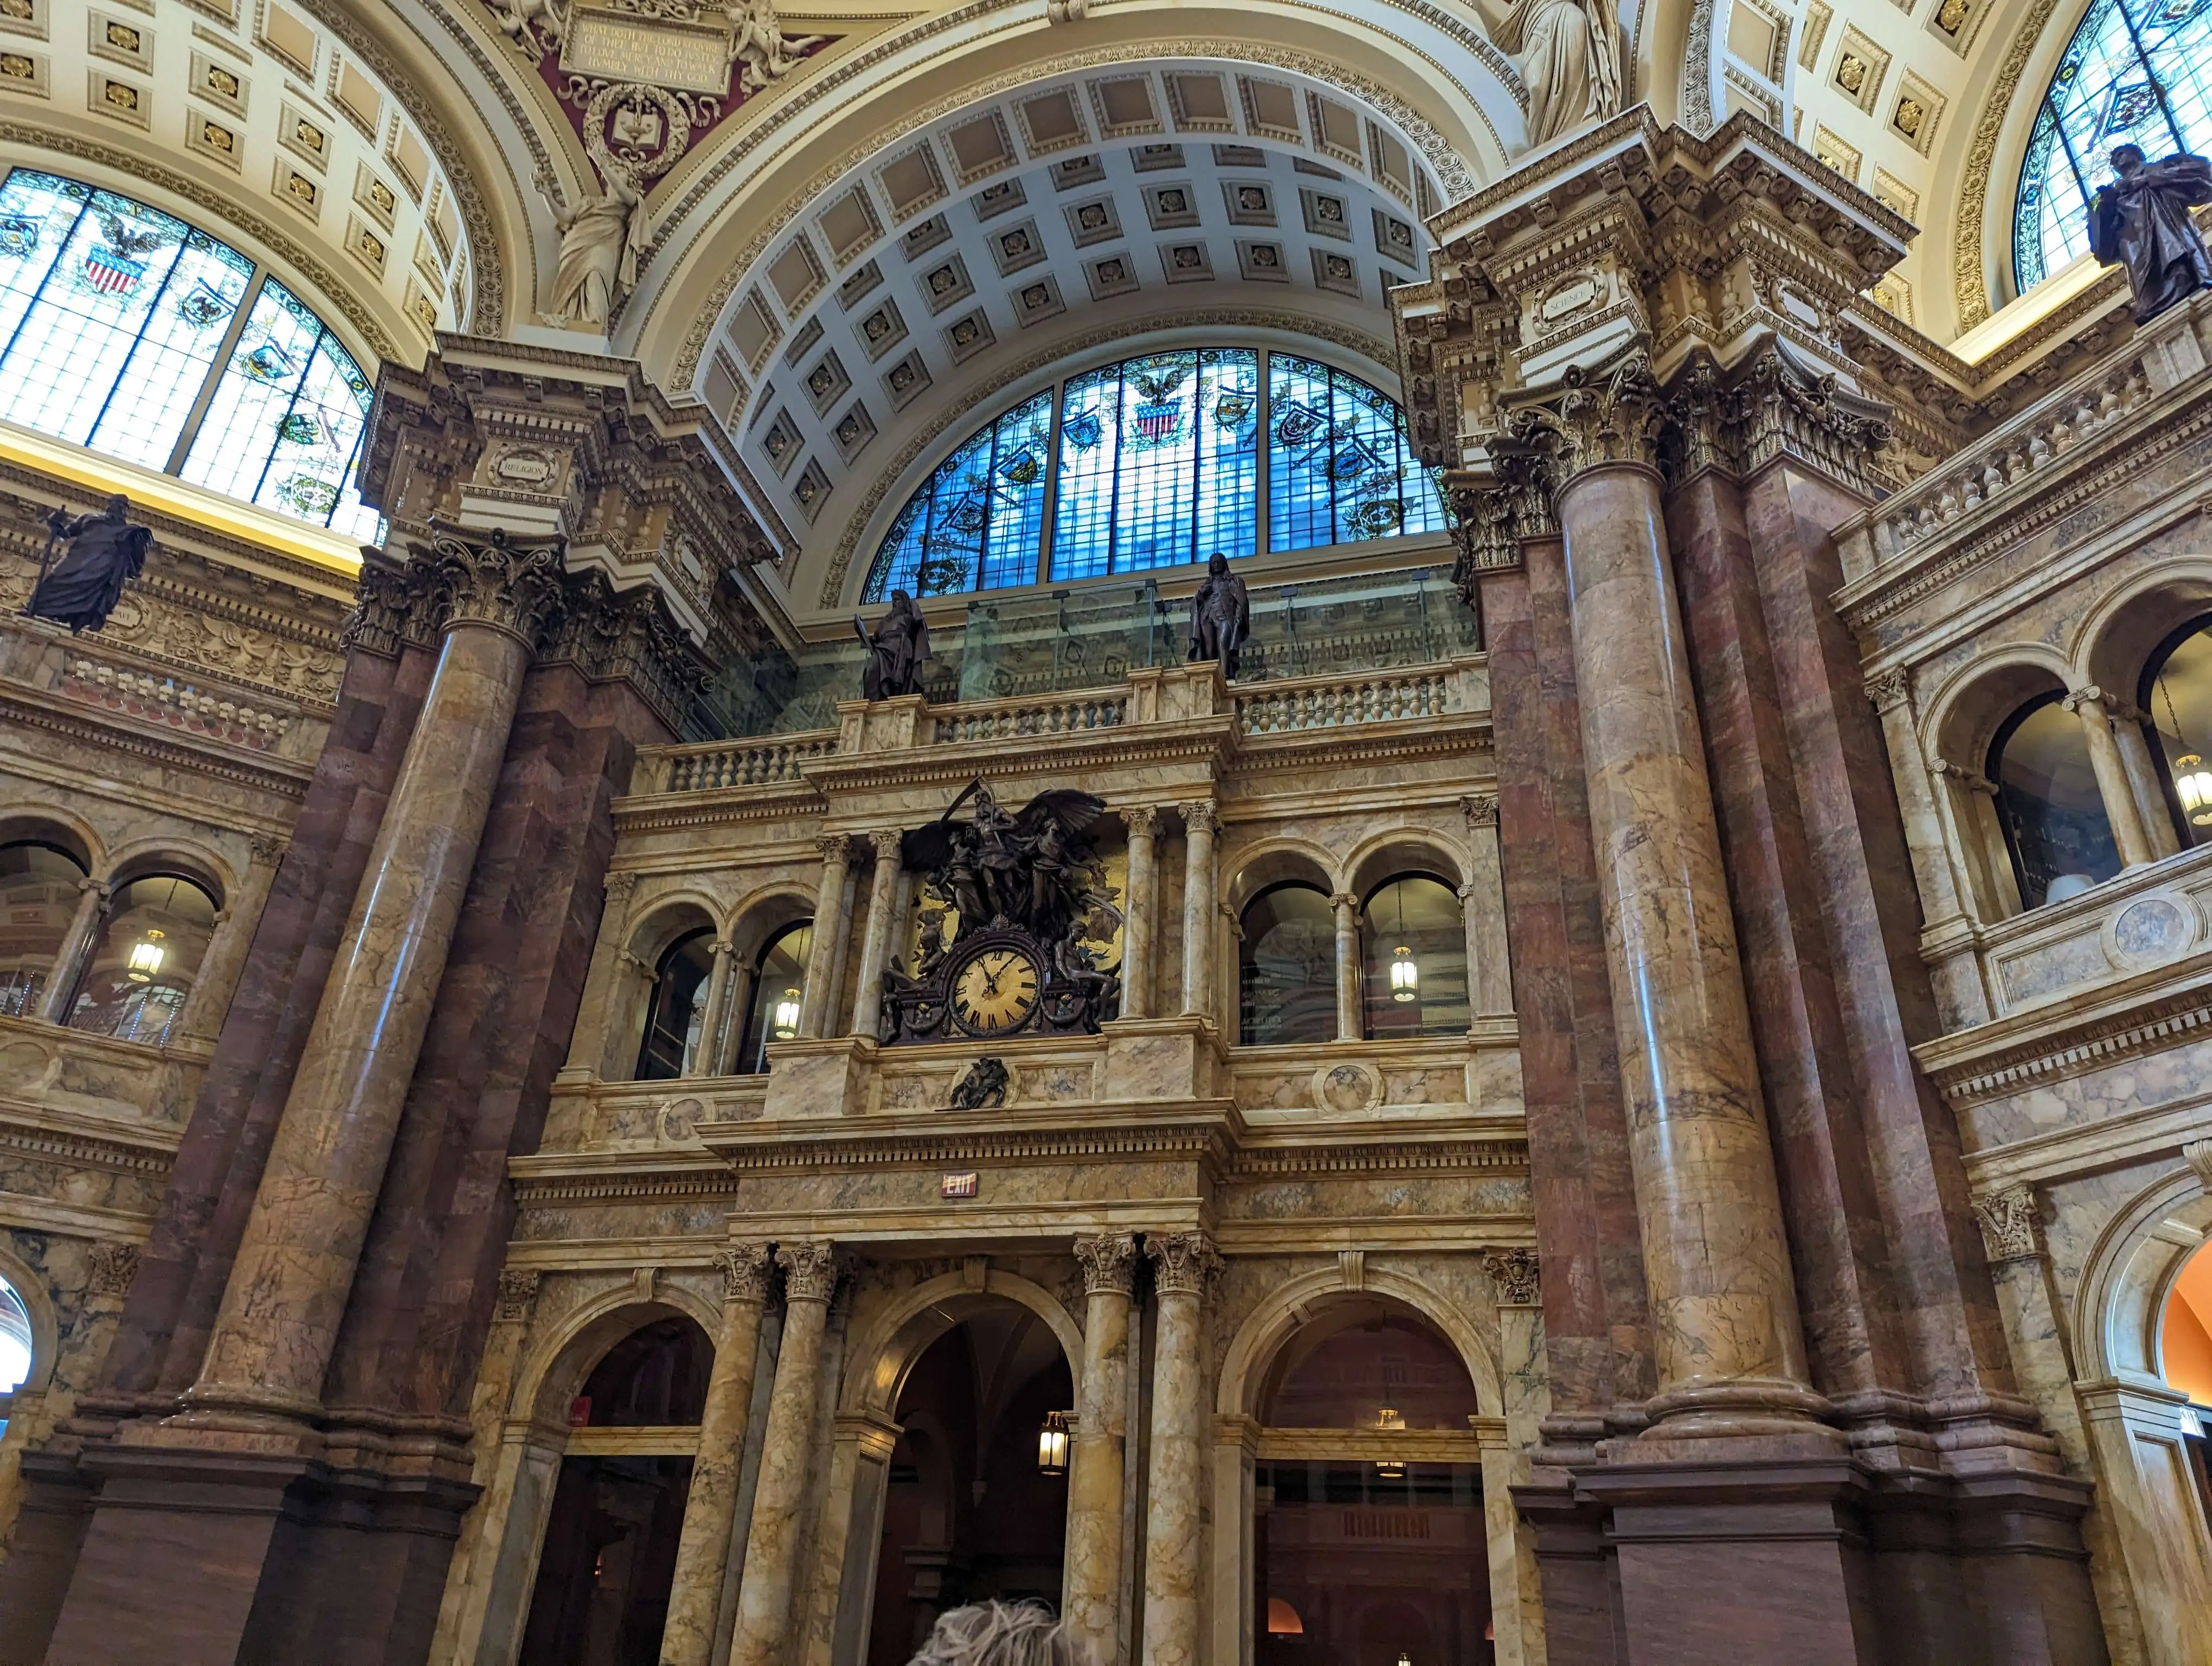 Photo by Ehab of the Library of Congress in Washington D.C.